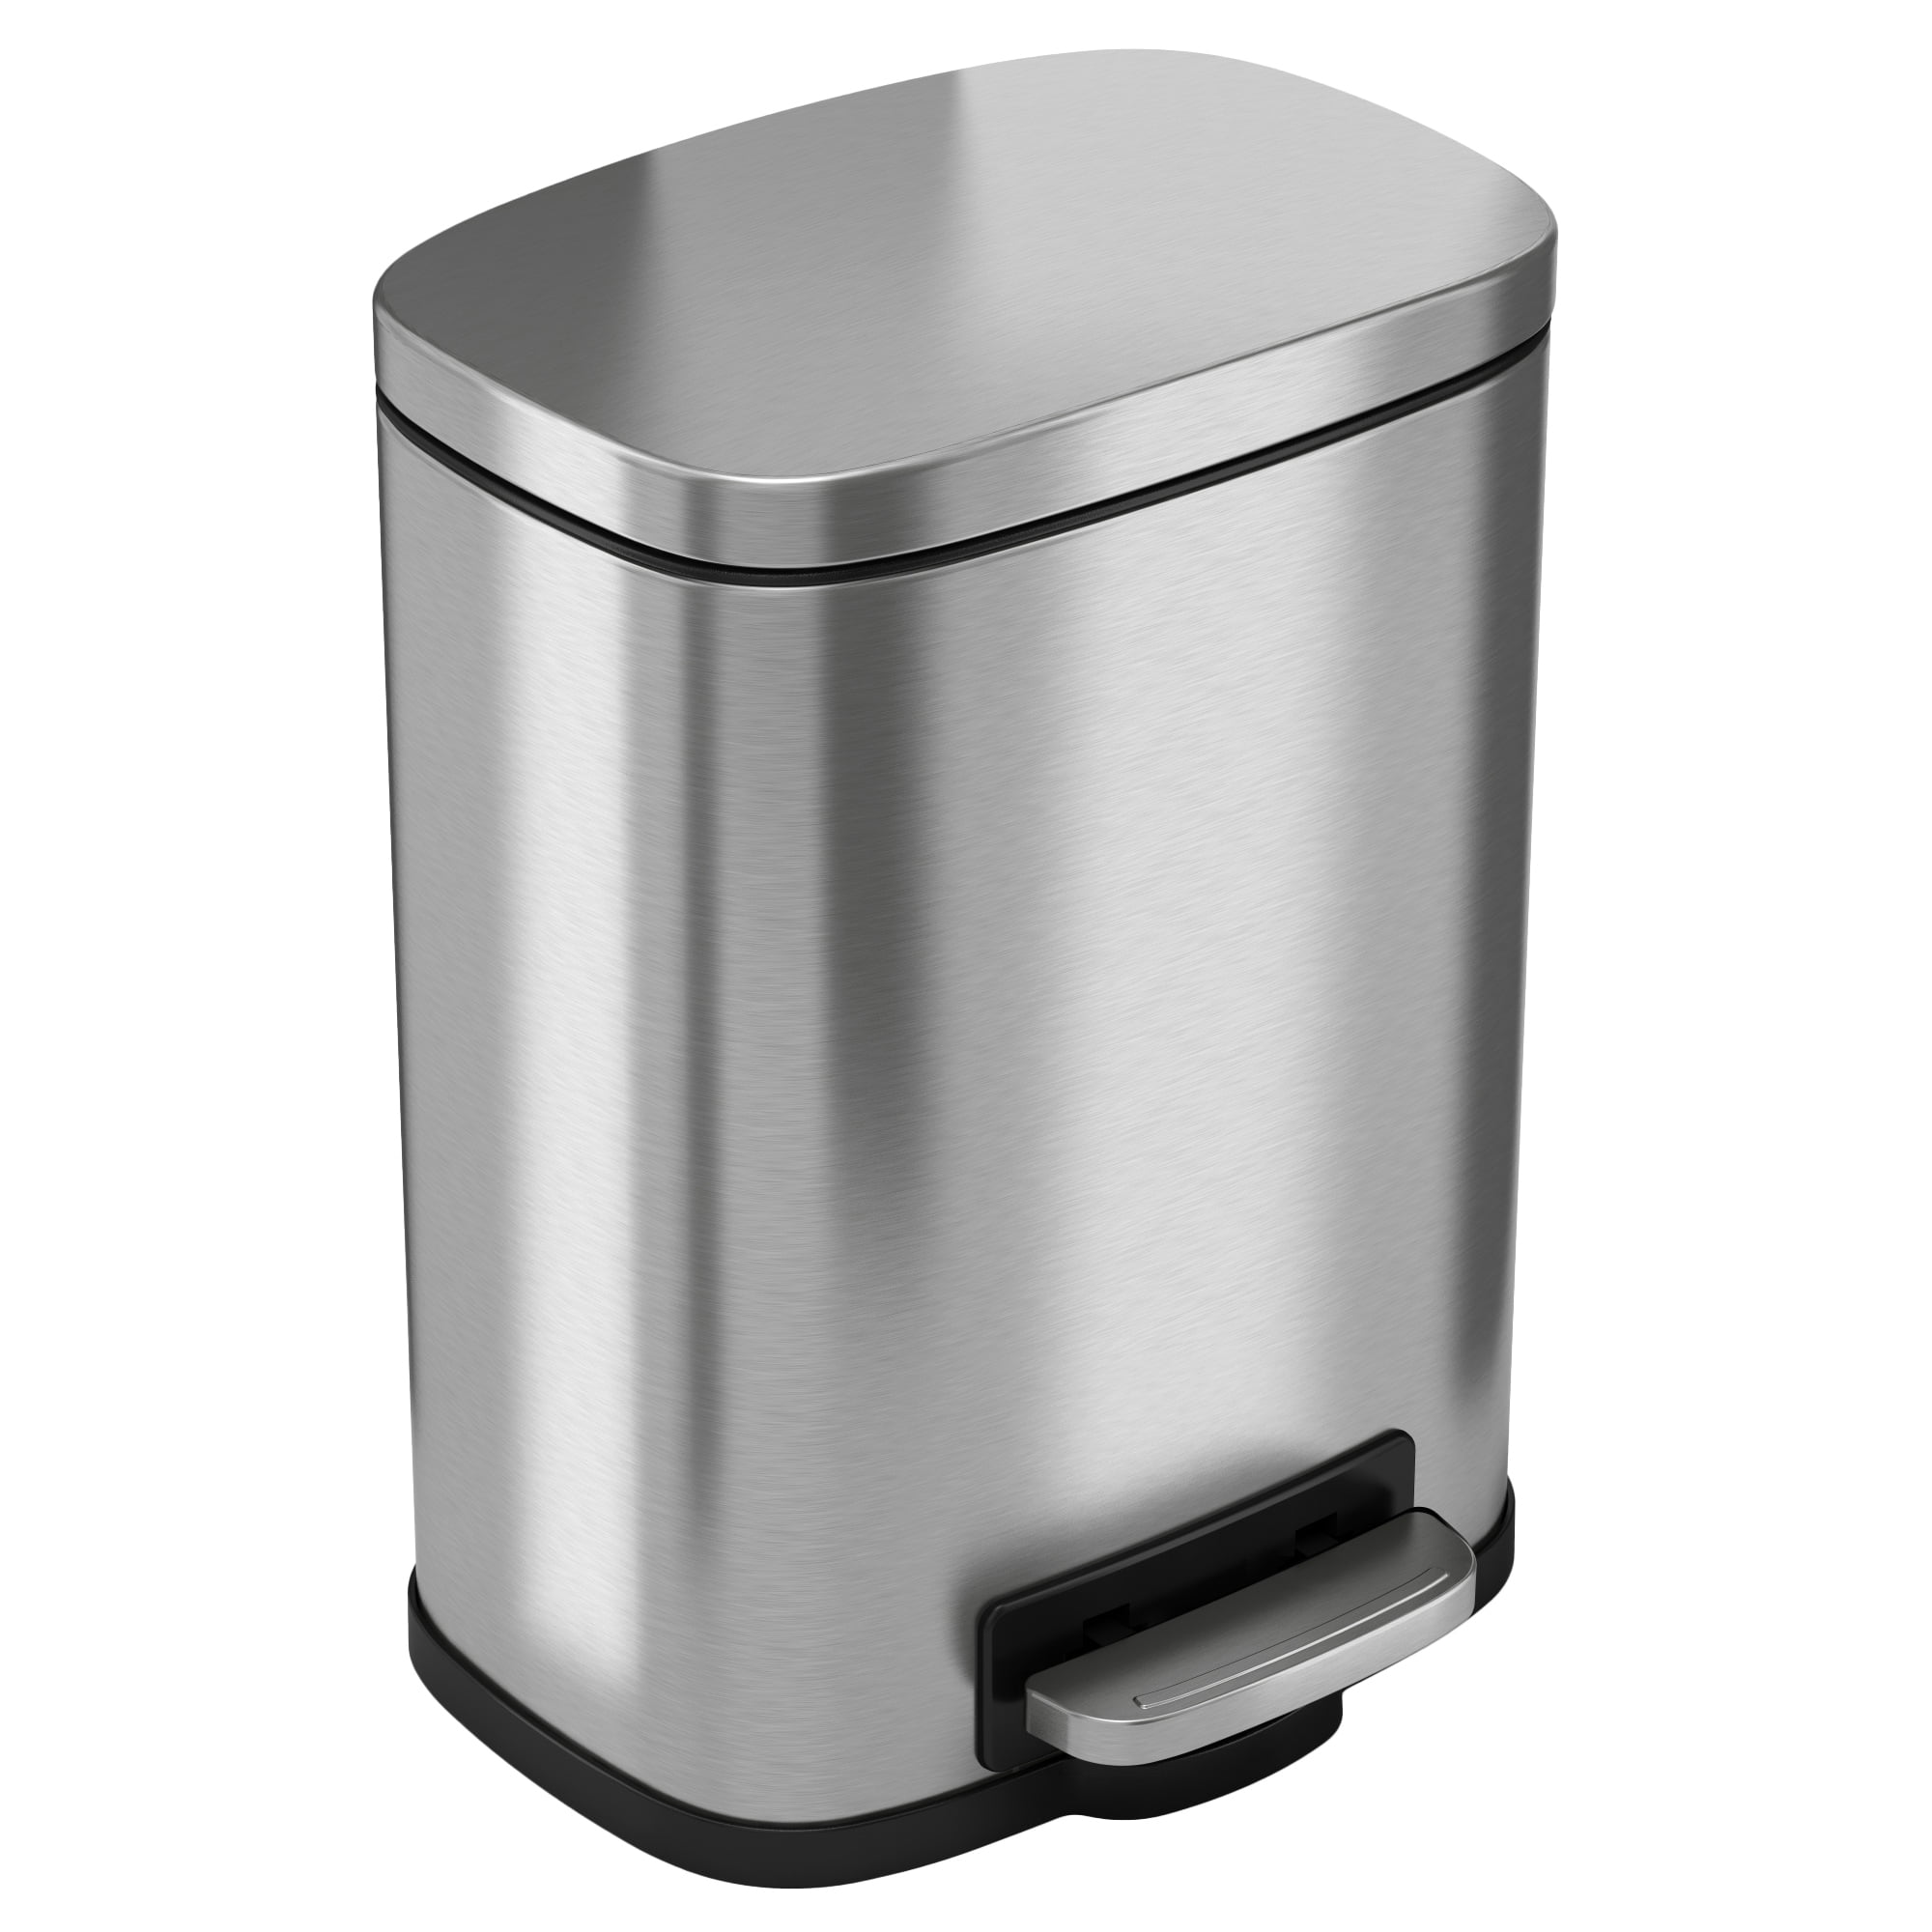 halo Step Stainless Steel Trash Can - Walmart.com 14.2 Gallon Stainless Steel Step Can